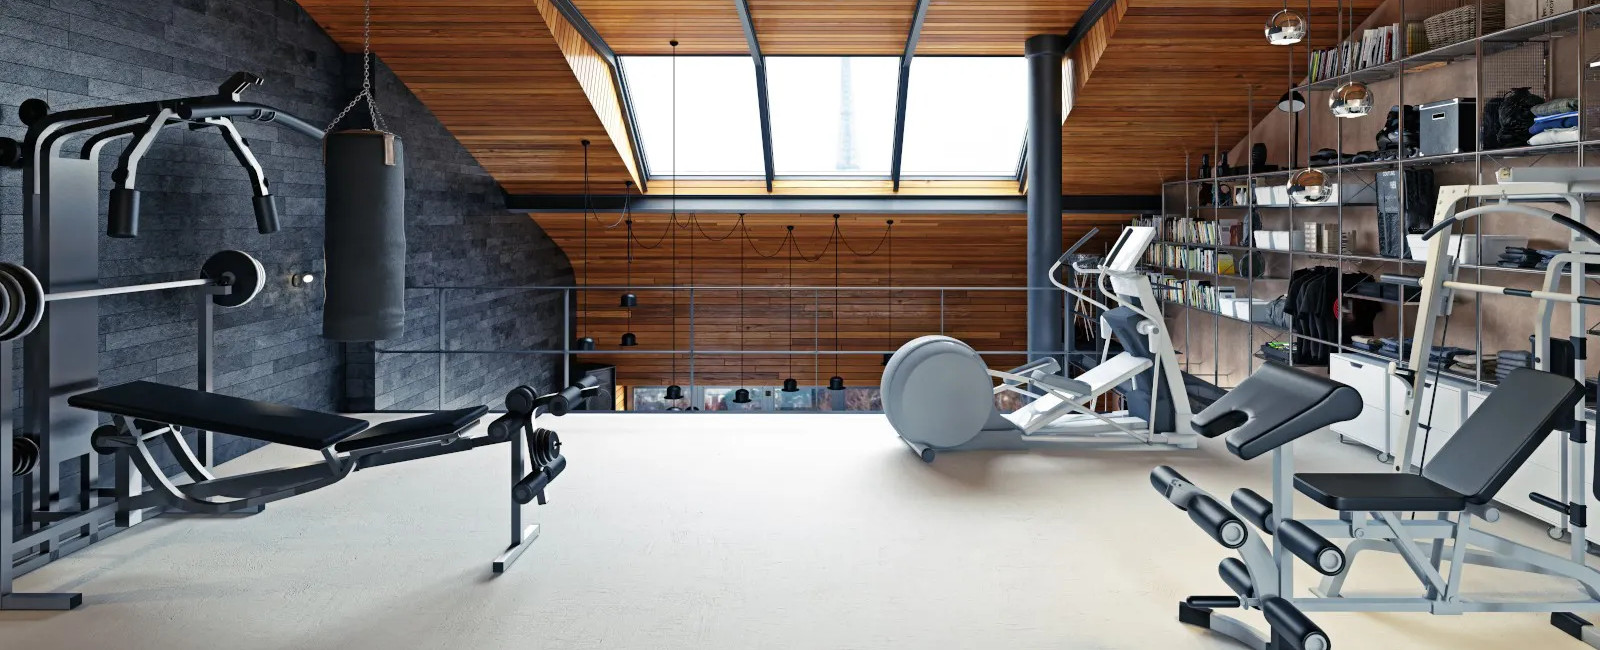 home gym in a house loft/attic